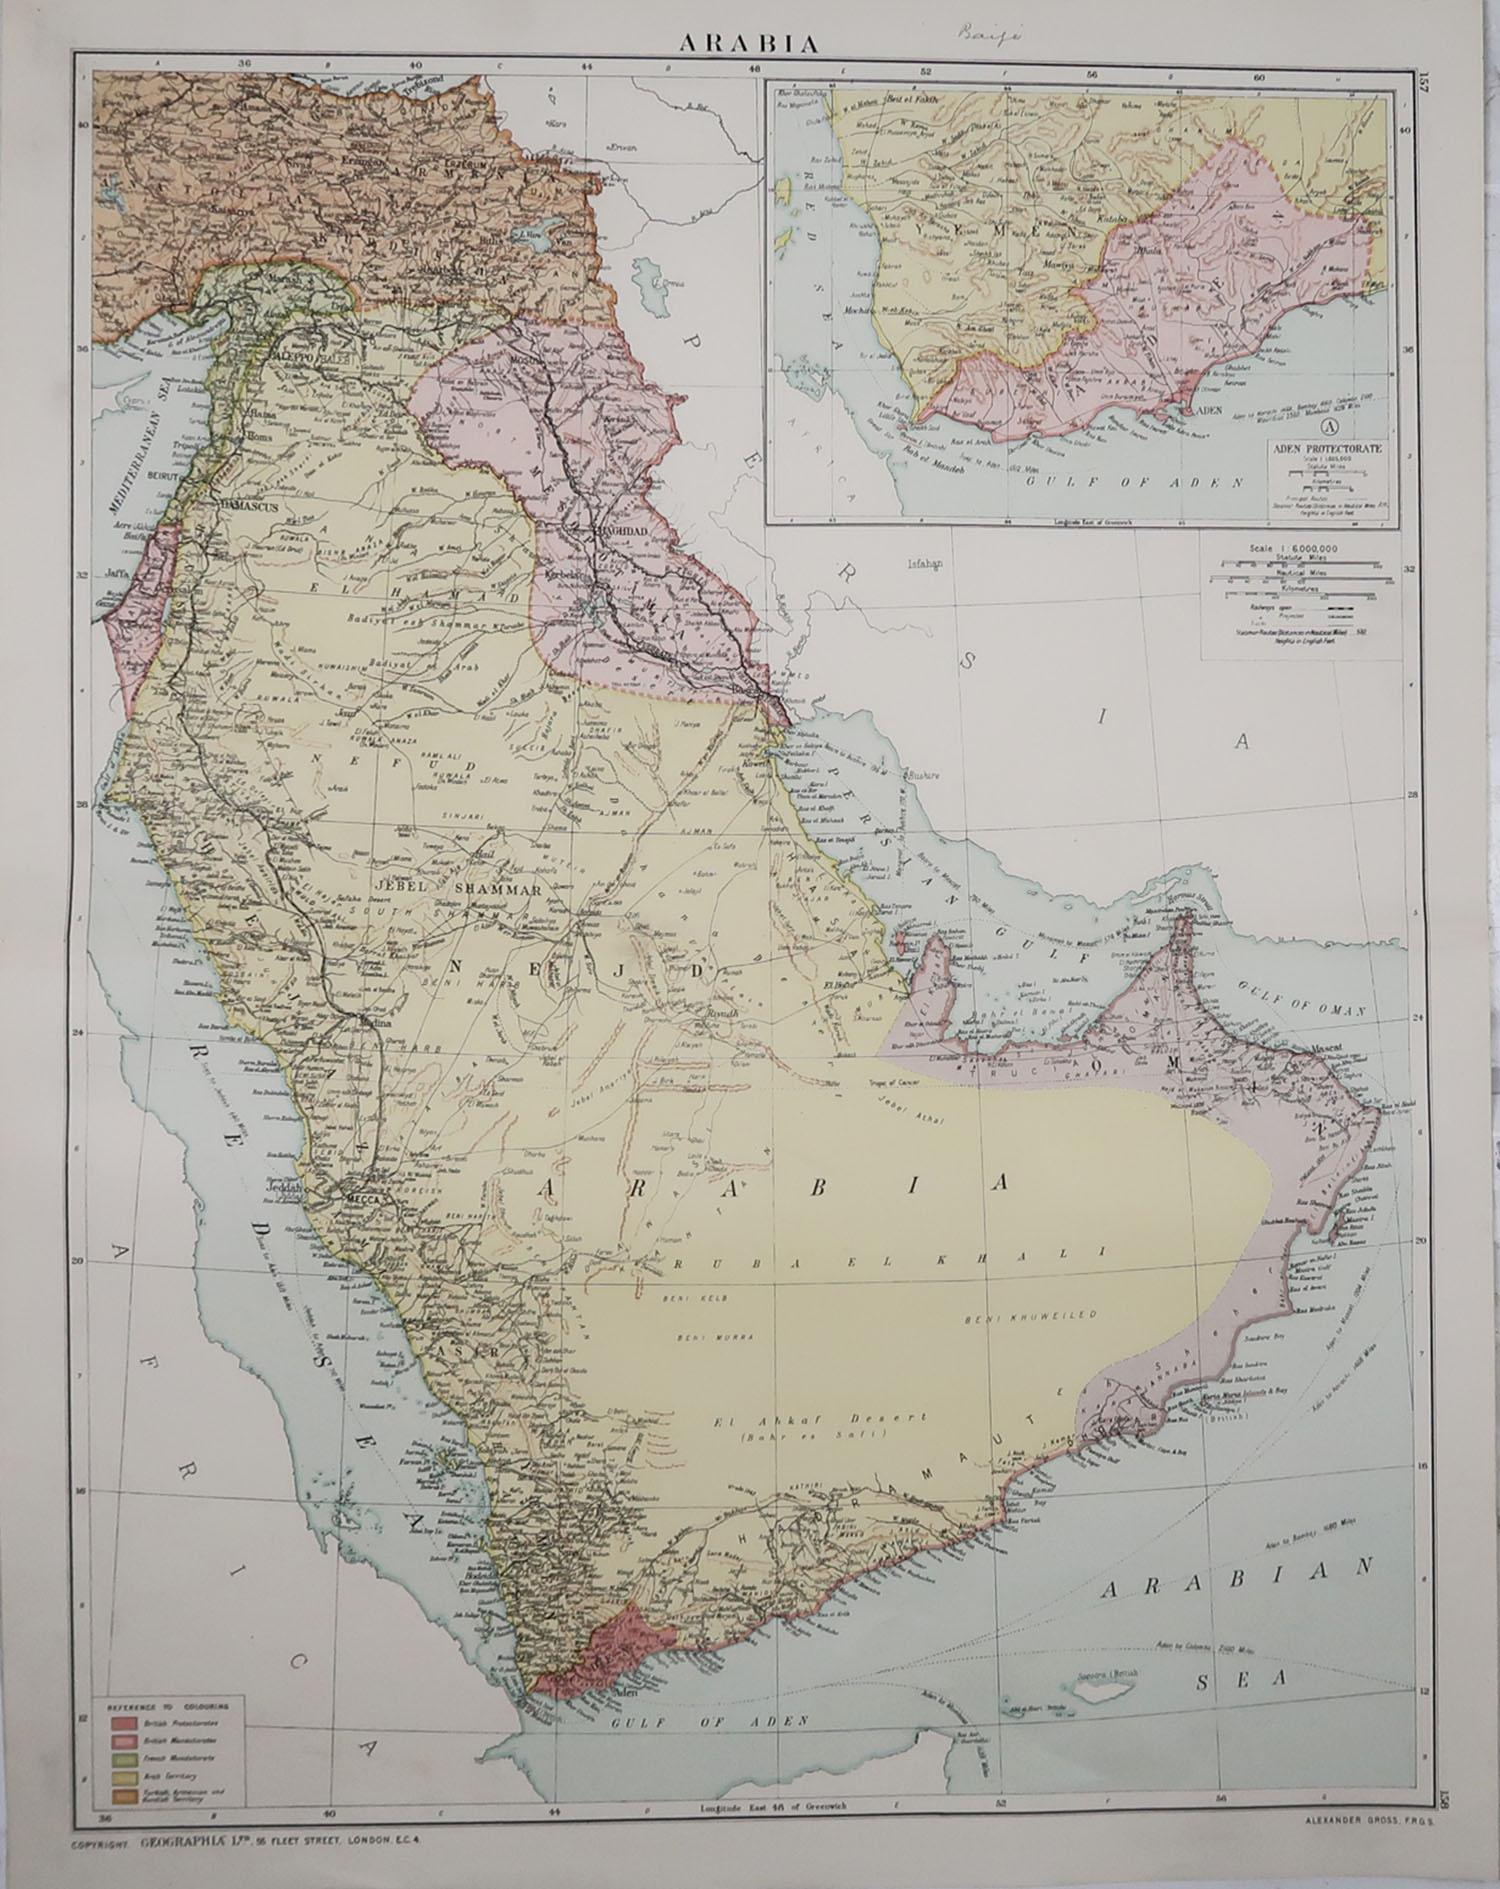 Great map of Saudi Arabia

Original color. Good condition

Published by Alexander Gross

Unframed.








 